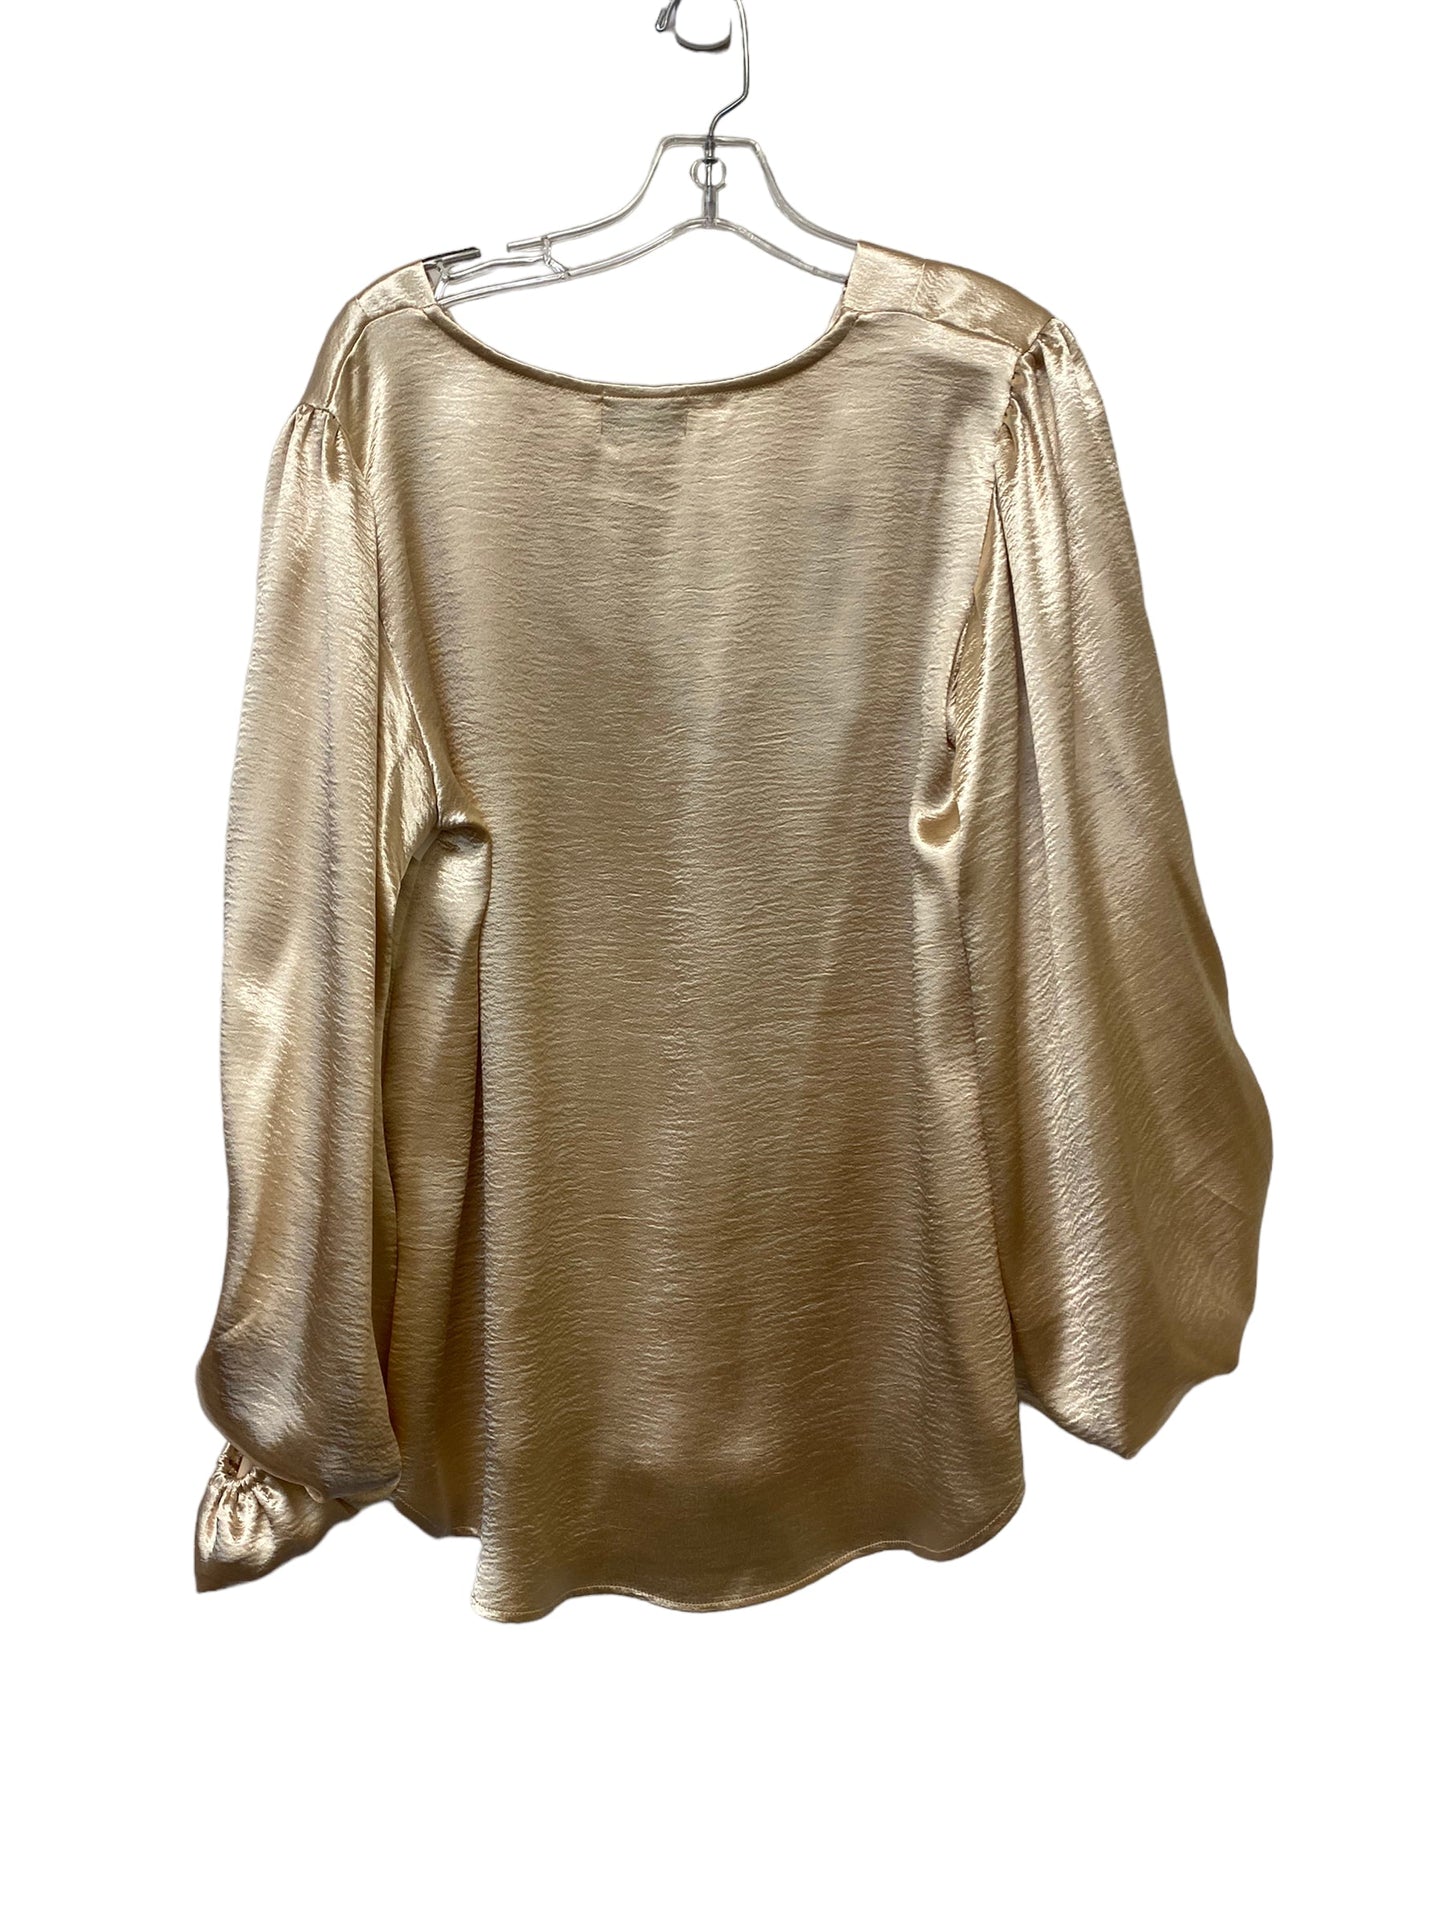 Blouse Long Sleeve By Adrienne Vittadini  Size: L